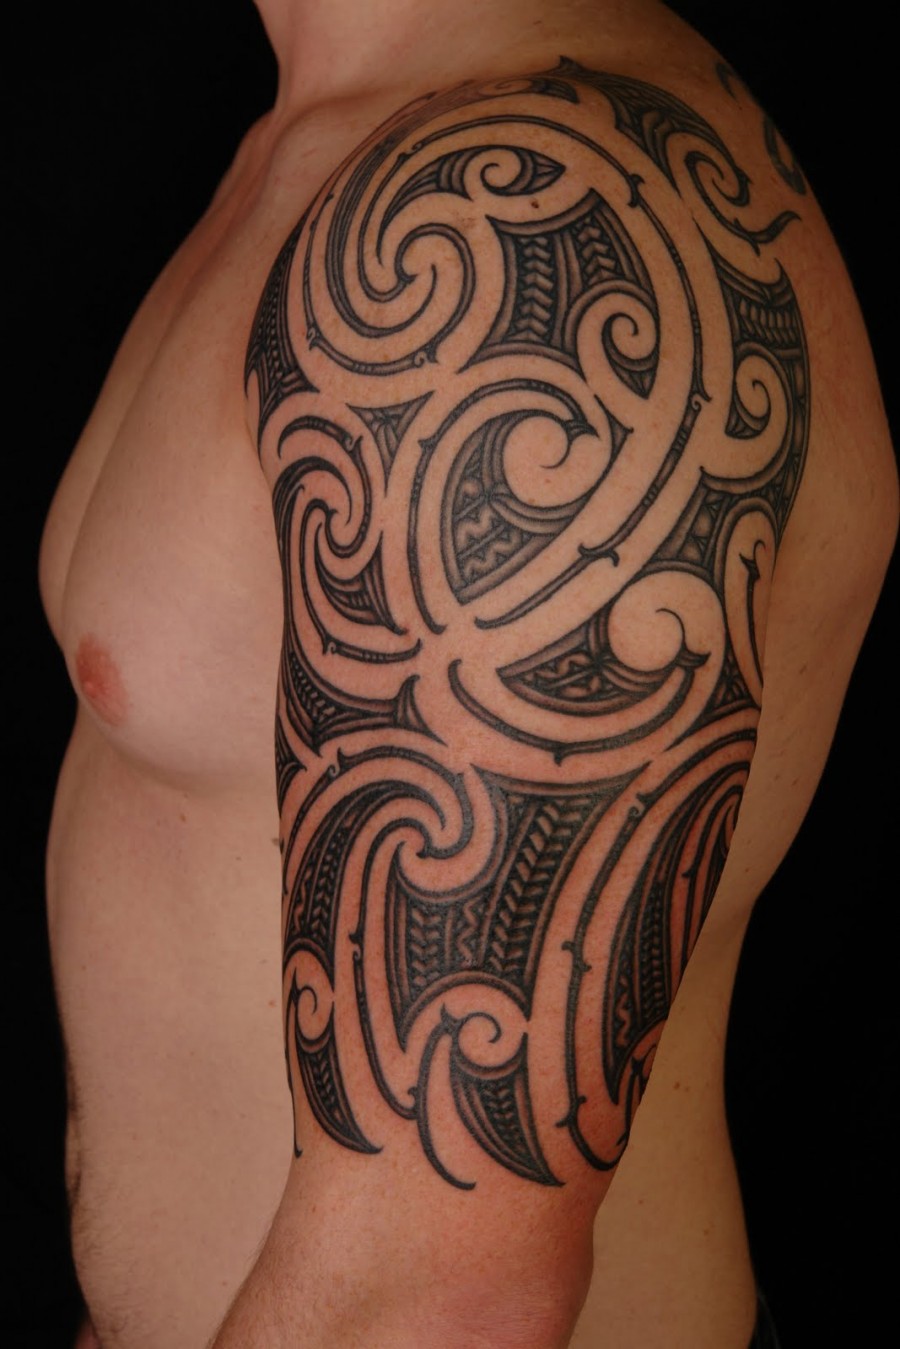 Exotic Half Sleeve Tattoo for Cool Man